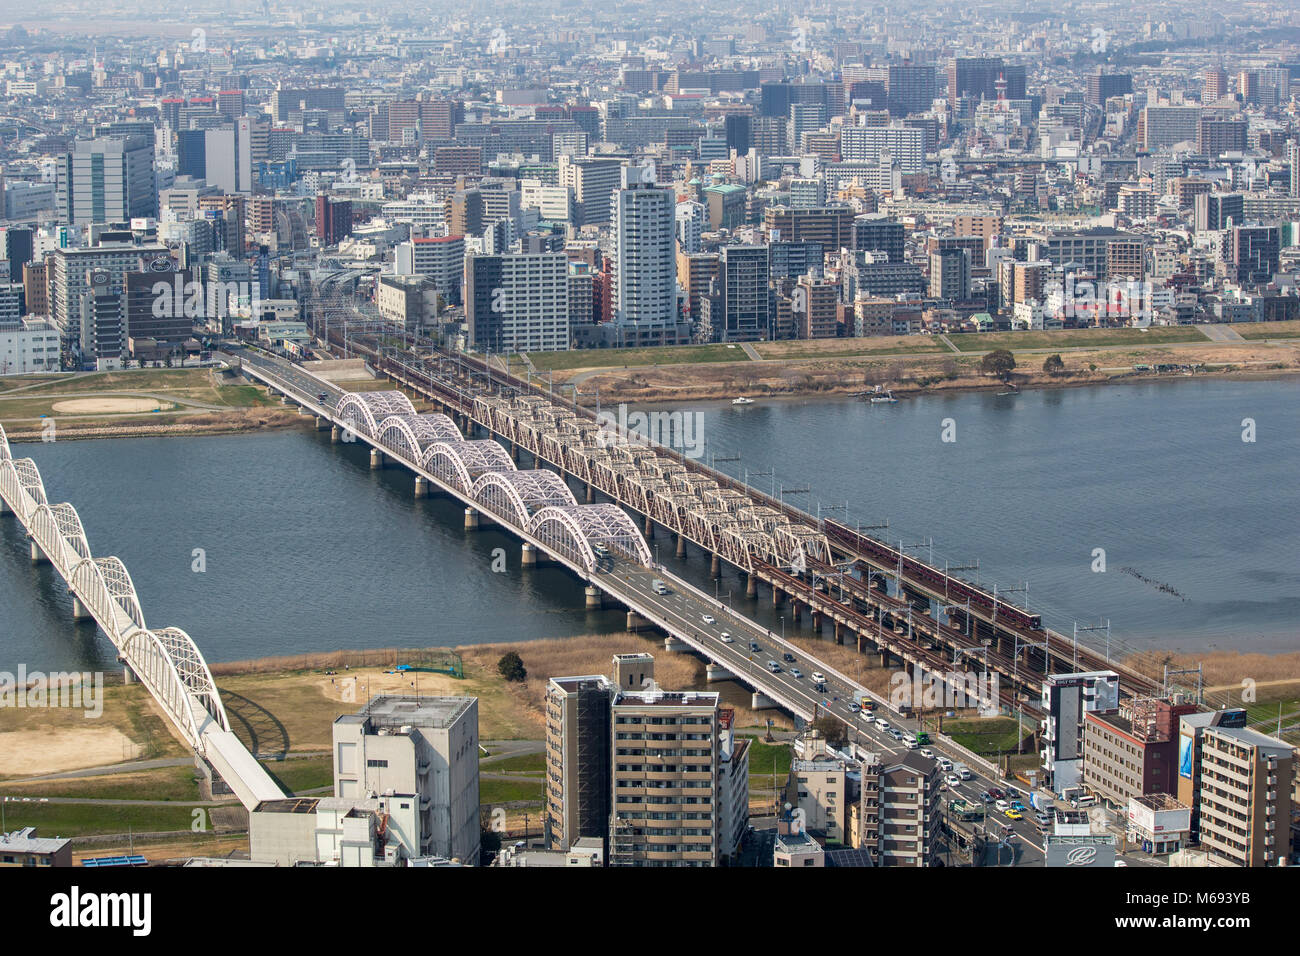 The view from the Umeda Sky Building looking toward the Yodo River, Osaka Prefecture, Japan Stock Photo